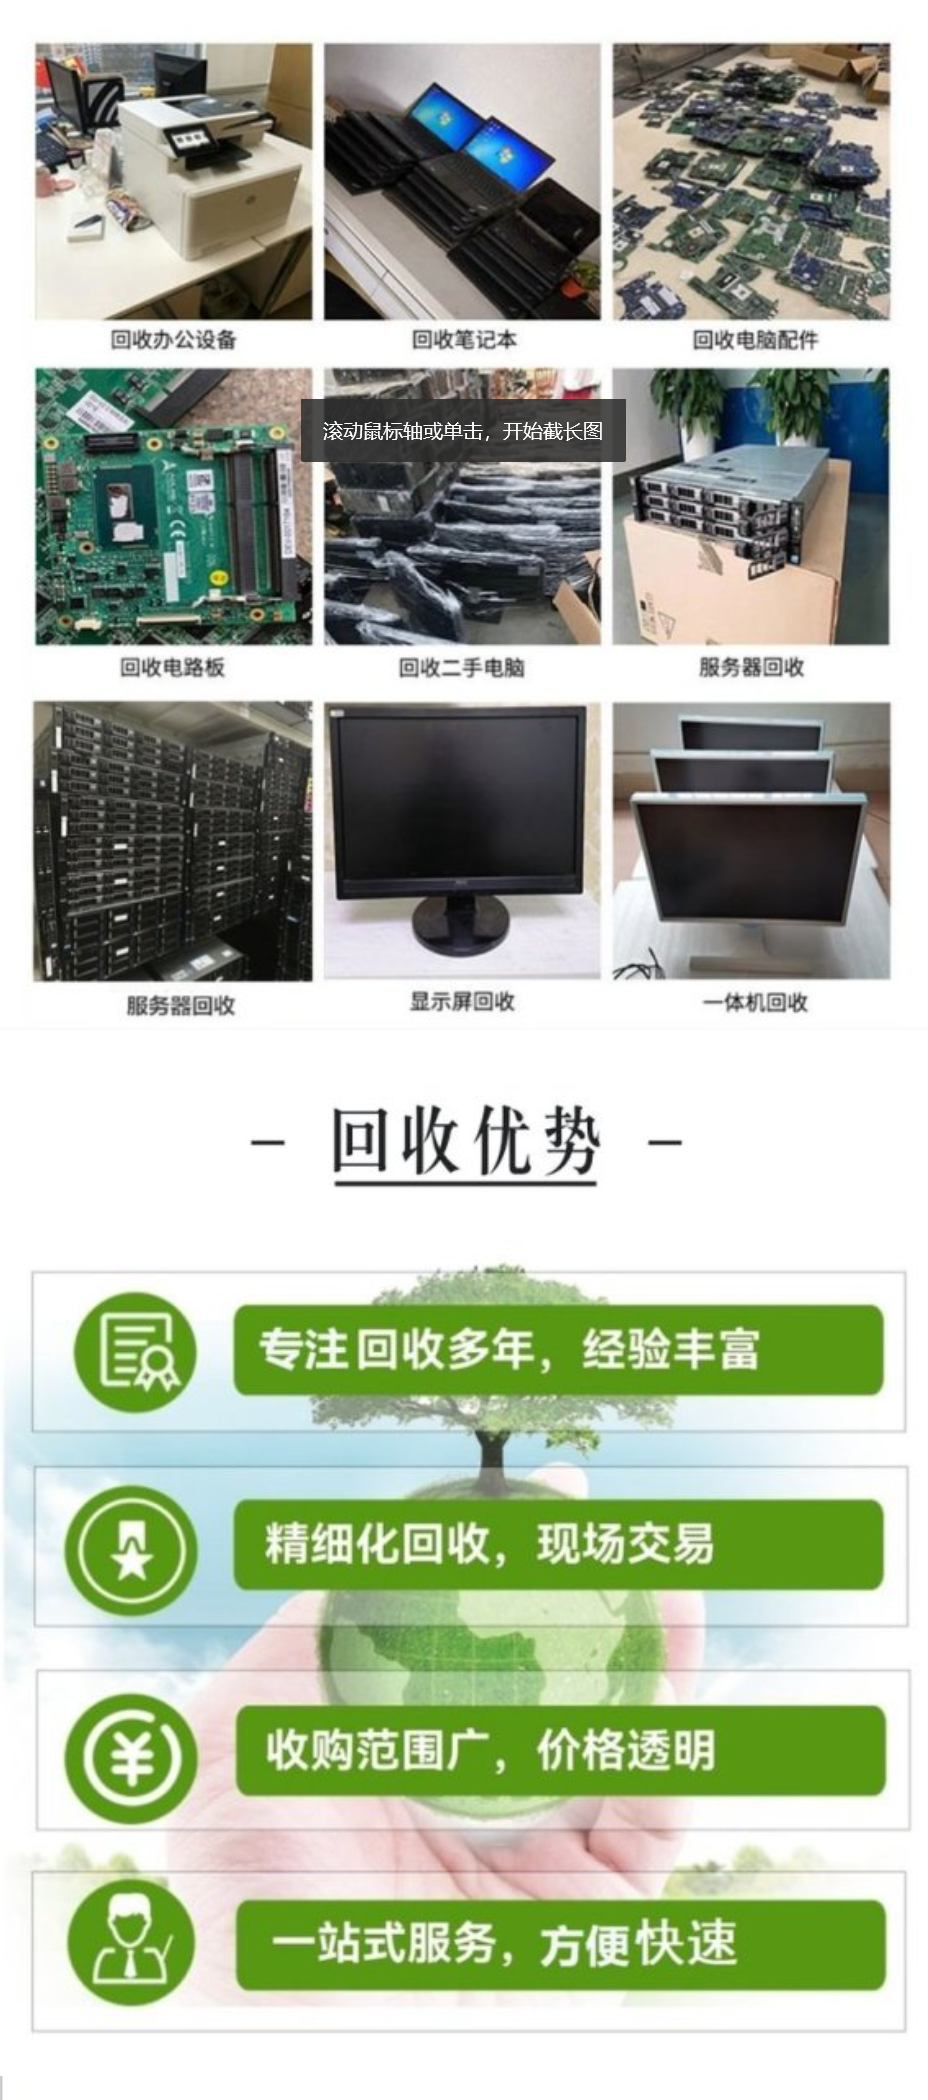 Apple Computer Dual System Laptop System Installation and Assembly Desktop Recycling Used Mobile Phones